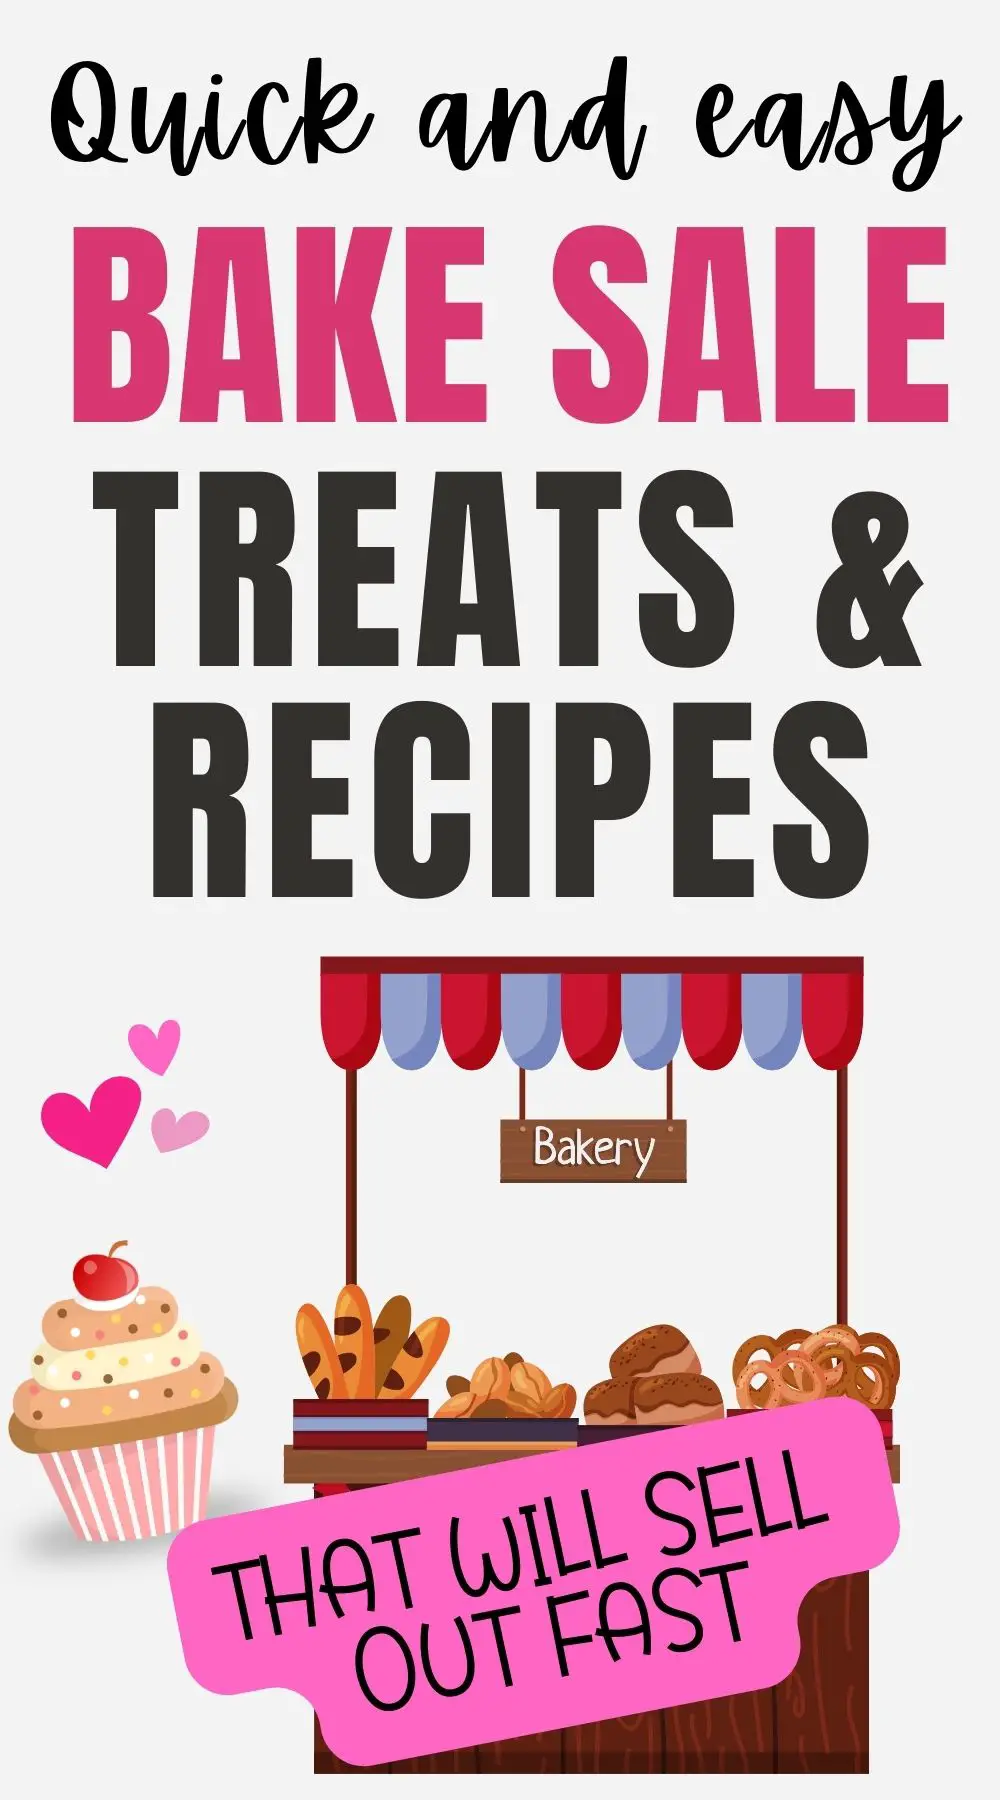 Easy Bake Sale Treats - Recipe Ideas That Will Sell Out Fast